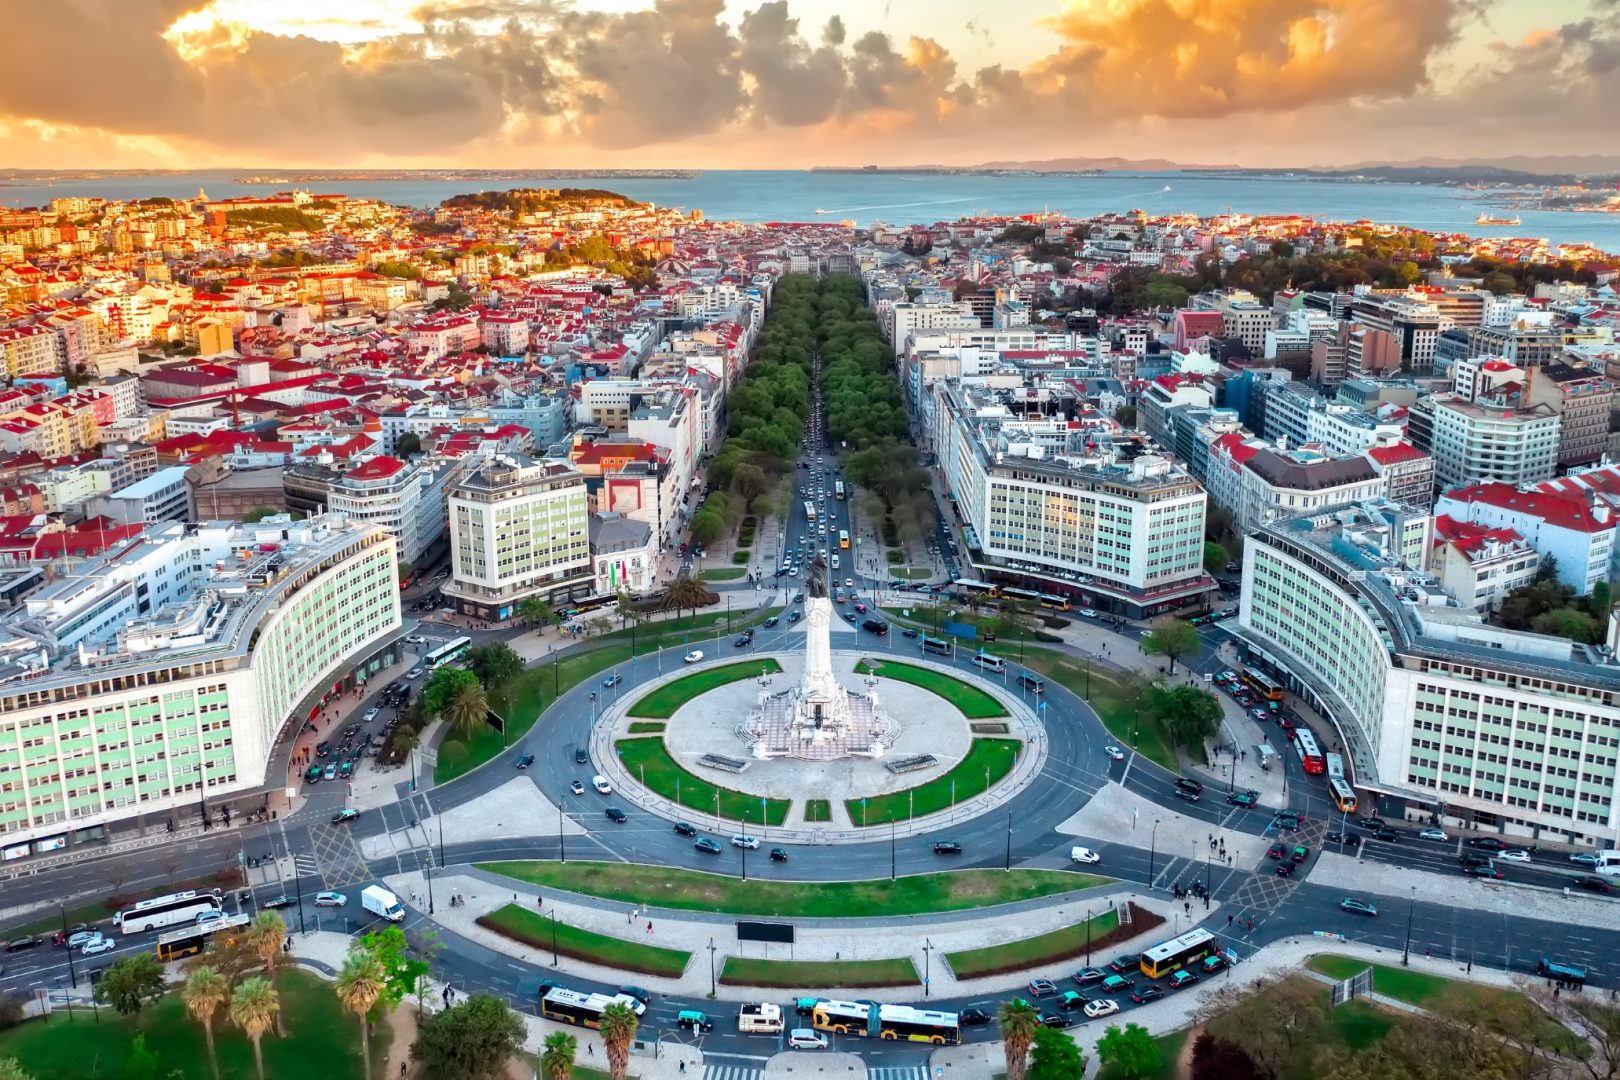 Aerial view of a bustling roundabout with a central monument, surrounded by an array of buildings at sunset, with the sea and horizon in the background.